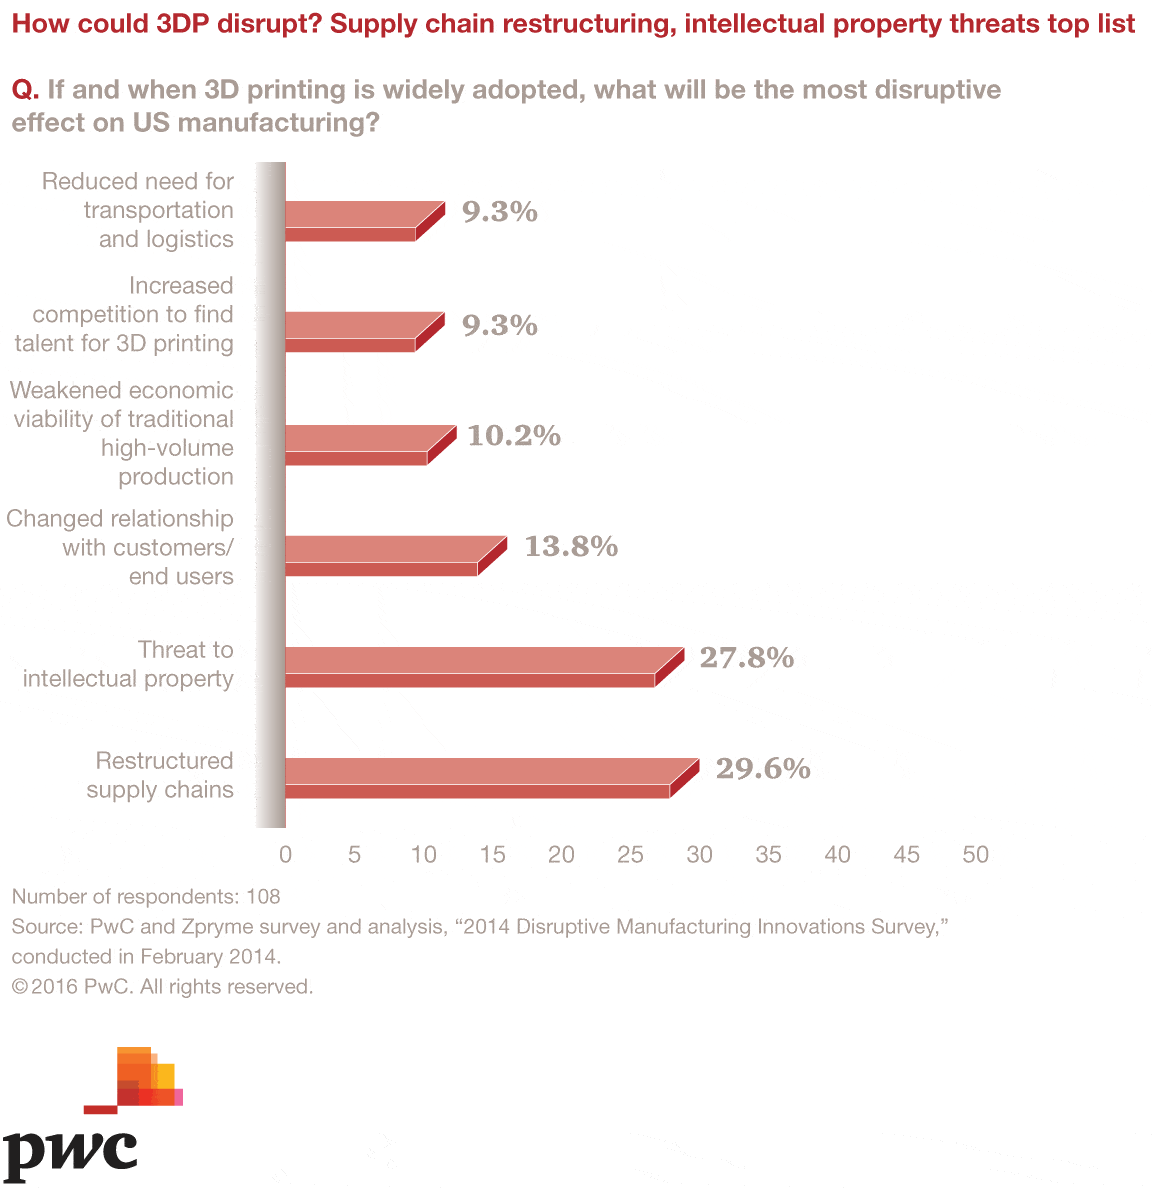 27.8% of US manufacturers surveyed by PwC believe the threat to intellectual property to be the most disruptive aspect of 3D printing